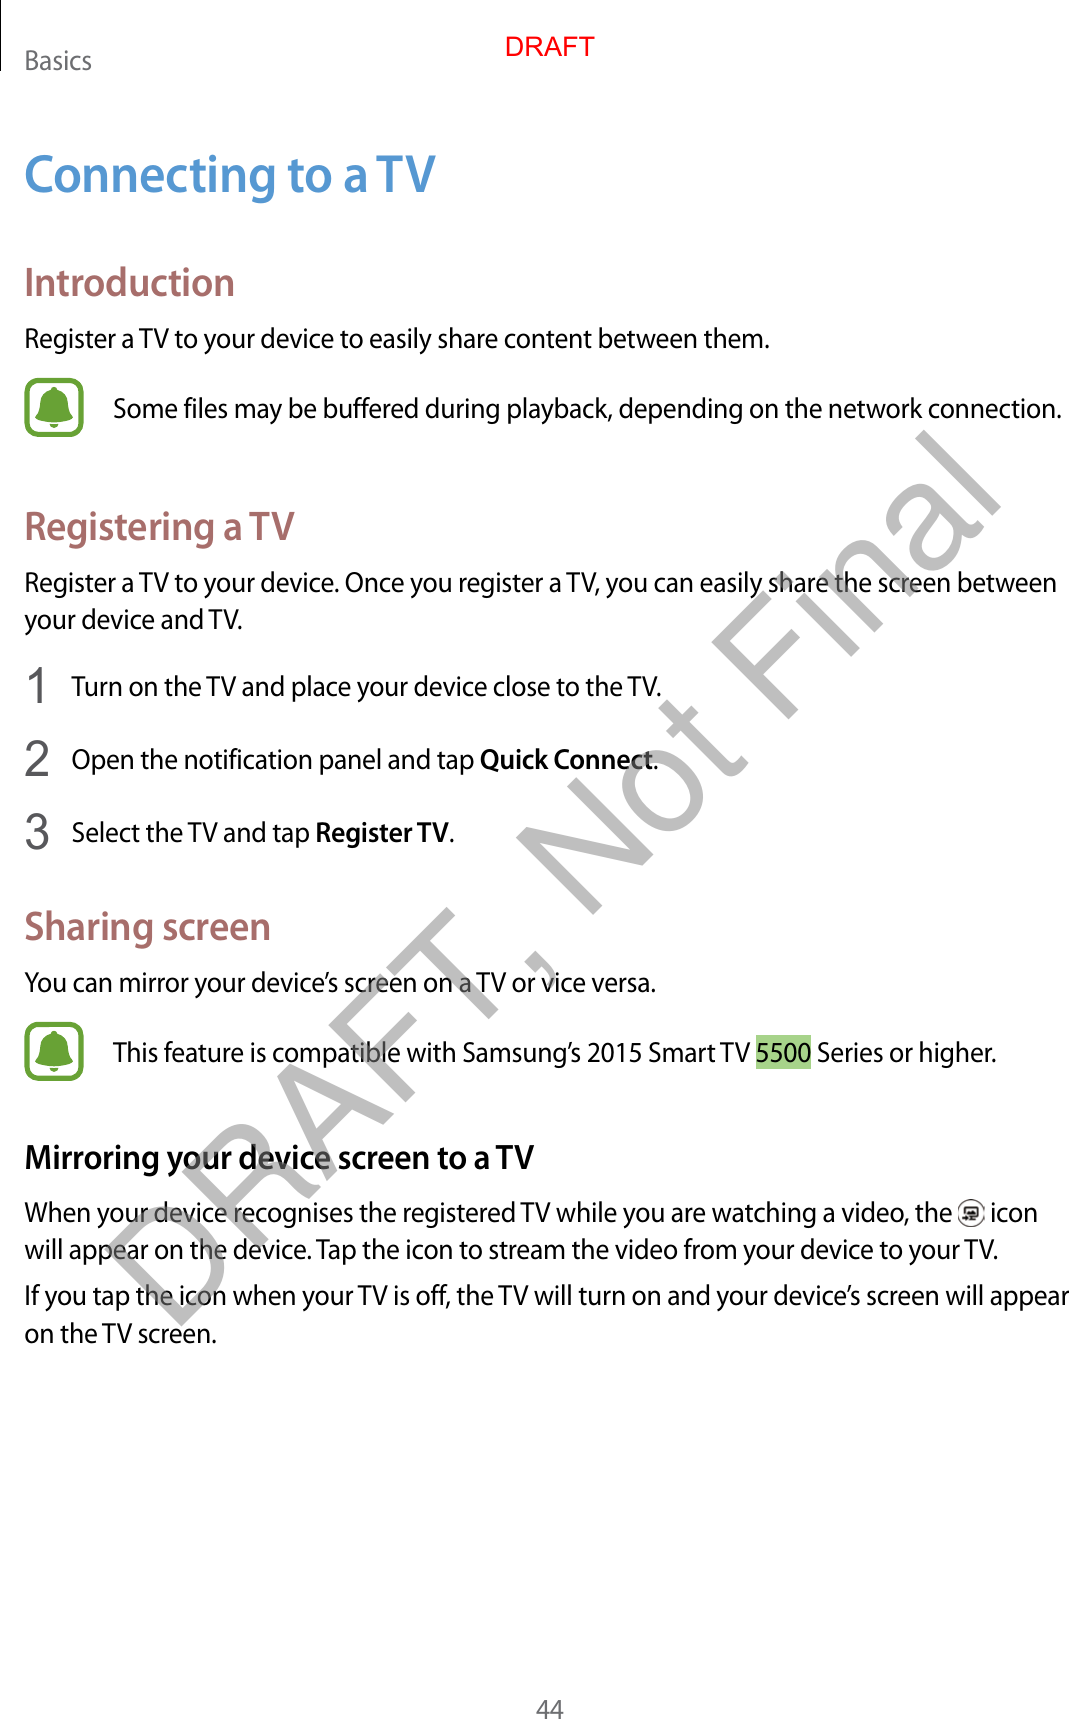 Basics44Connecting to a TVIntroductionRegister a TV to your device to easily share content between them.Some files may be buffered during playback, depending on the network connection.Registering a TVRegister a TV to your device. Once you register a TV, you can easily share the screen between your device and TV.1  Turn on the TV and place your device close to the TV.2  Open the notification panel and tap Quick Connect.3  Select the TV and tap Register TV.Sharing screenYou can mirror your device’s screen on a TV or vice versa.This feature is compatible with Samsung’s 2015 Smart TV 5500 Series or higher.Mirroring your device screen to a TVWhen your device recognises the registered TV while you are watching a video, the   icon will appear on the device. Tap the icon to stream the video from your device to your TV.If you tap the icon when your TV is off, the TV will turn on and your device’s screen will appear on the TV screen.DRAFTDRAFT, Not Final